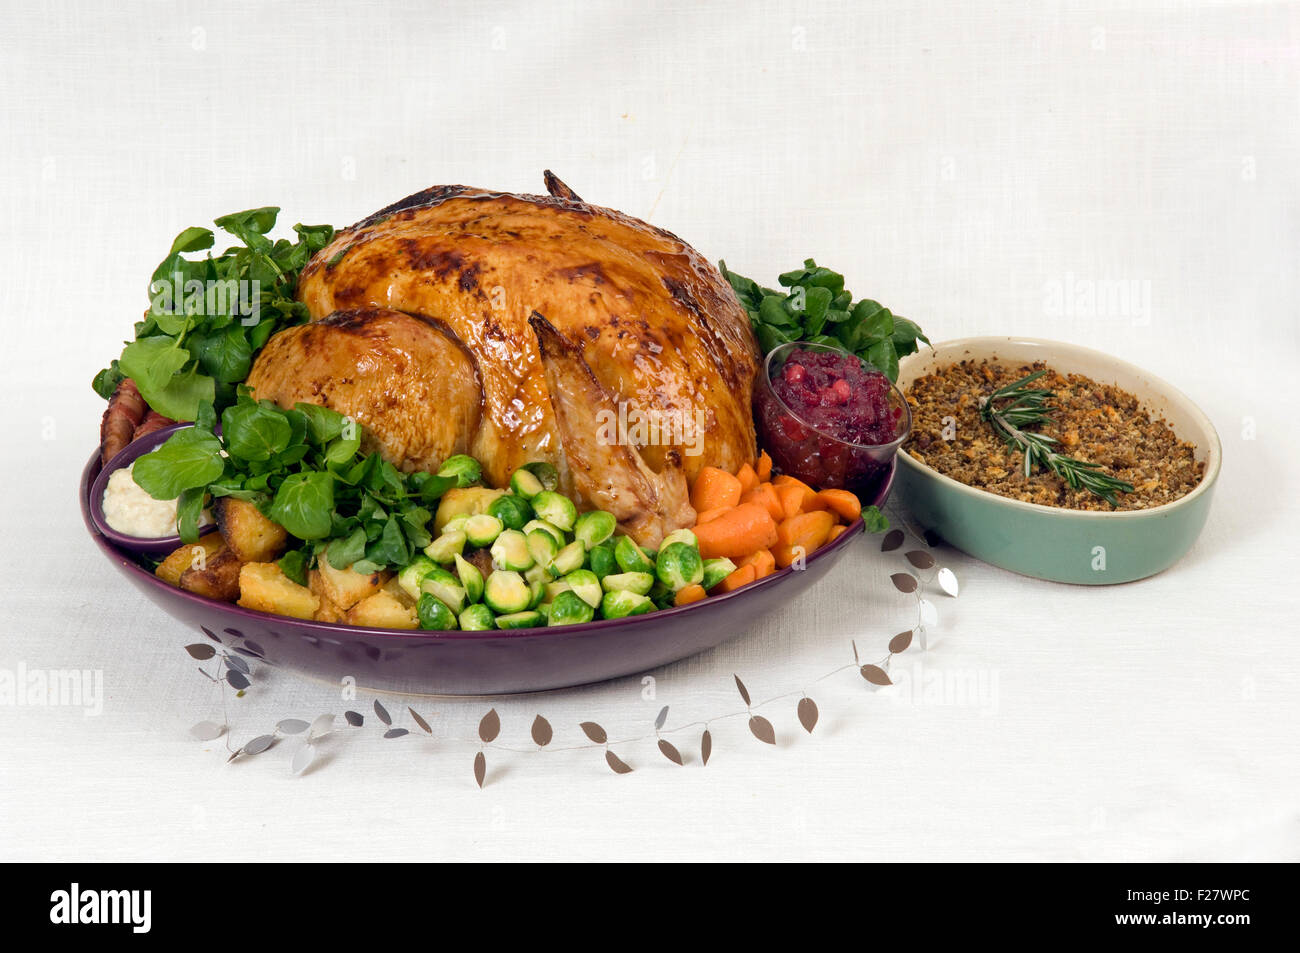 A Christmas roast turkey dinner with roast potatoes, chestnut stuffing, parsnips, cranberry sauce, bread sauce and vegetables.UK Stock Photo